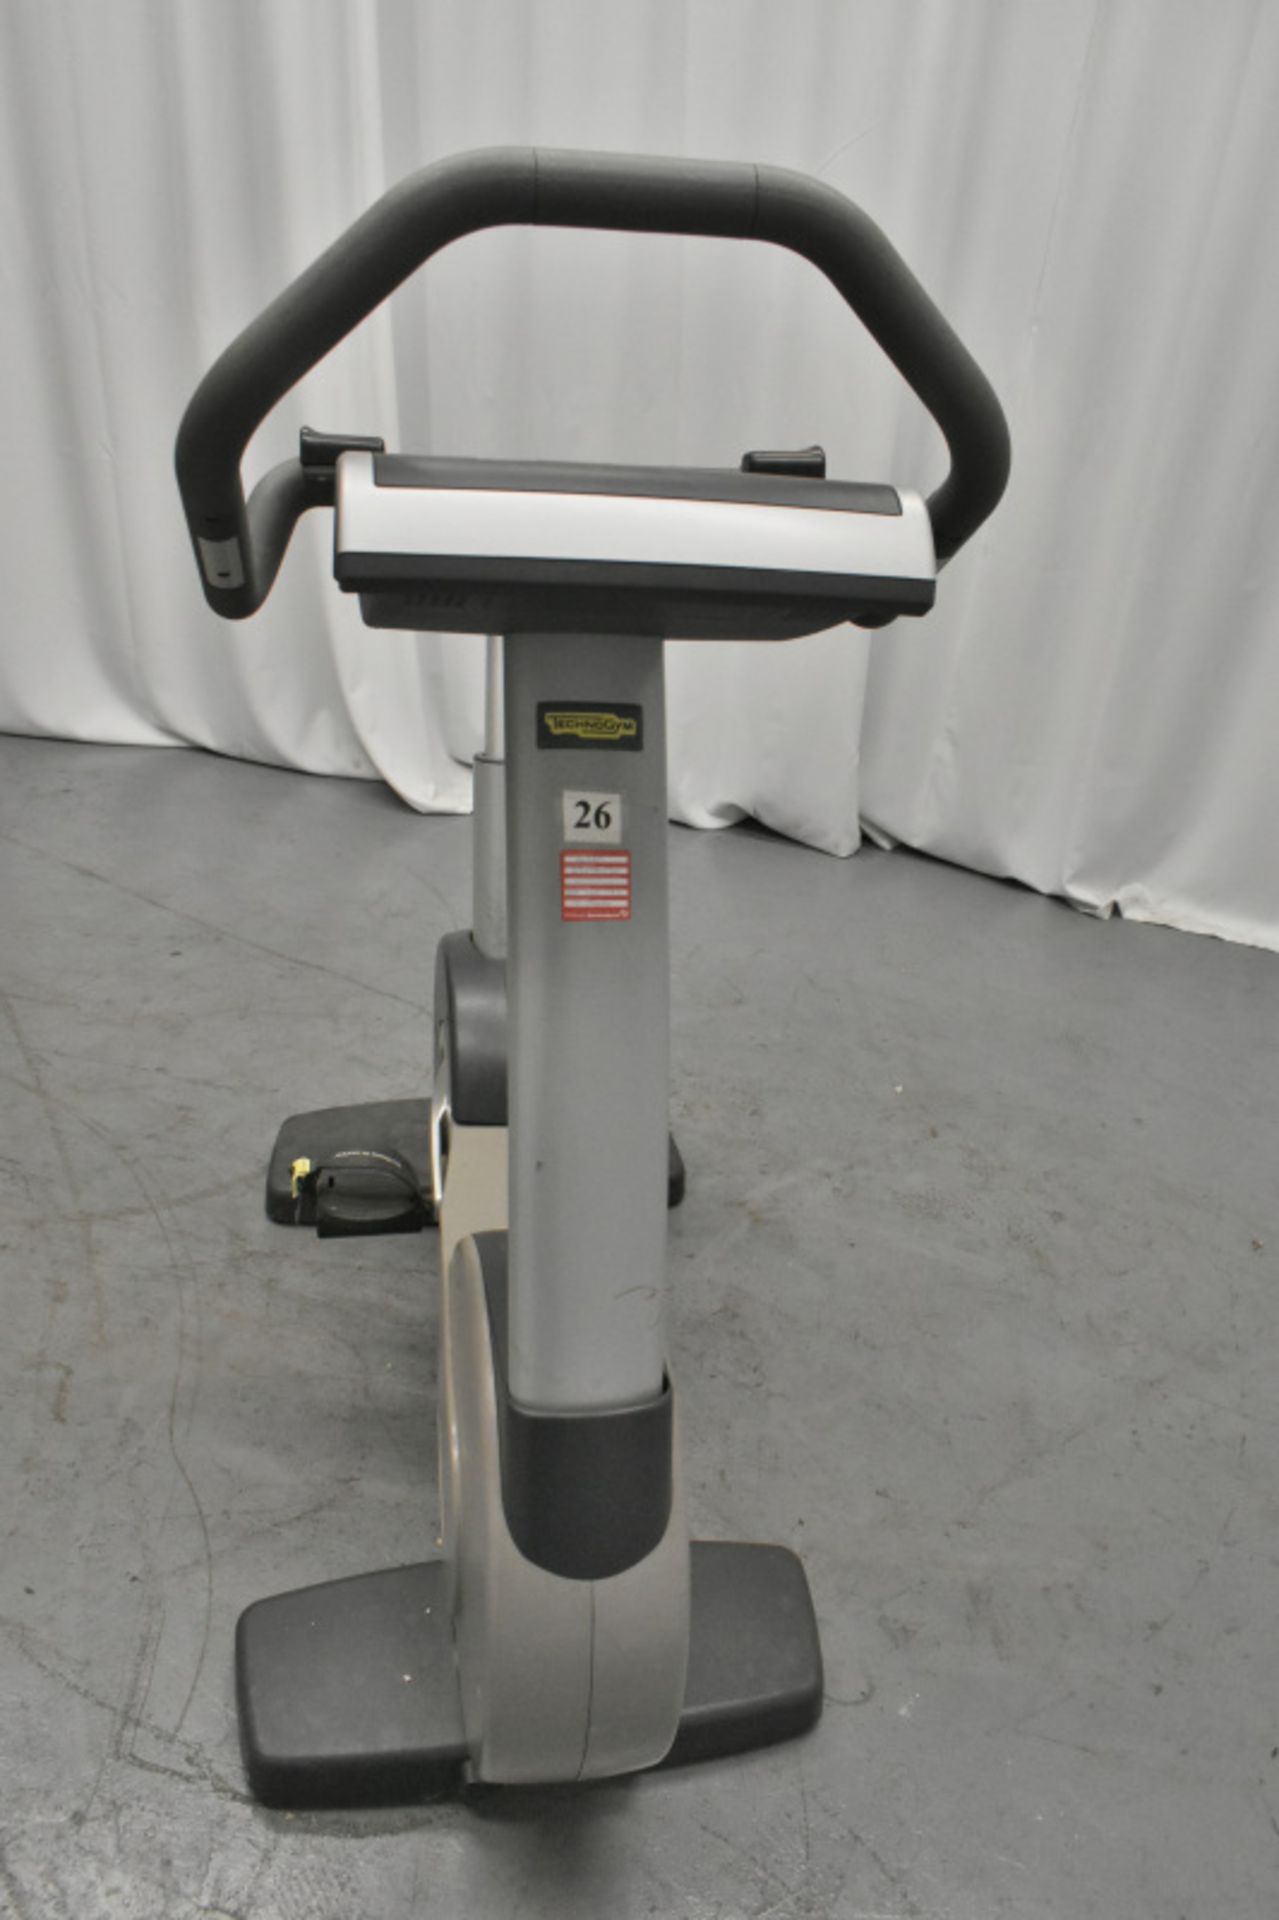 Technogym Exercise Bike - Please check pictures for overall condition - Image 4 of 12